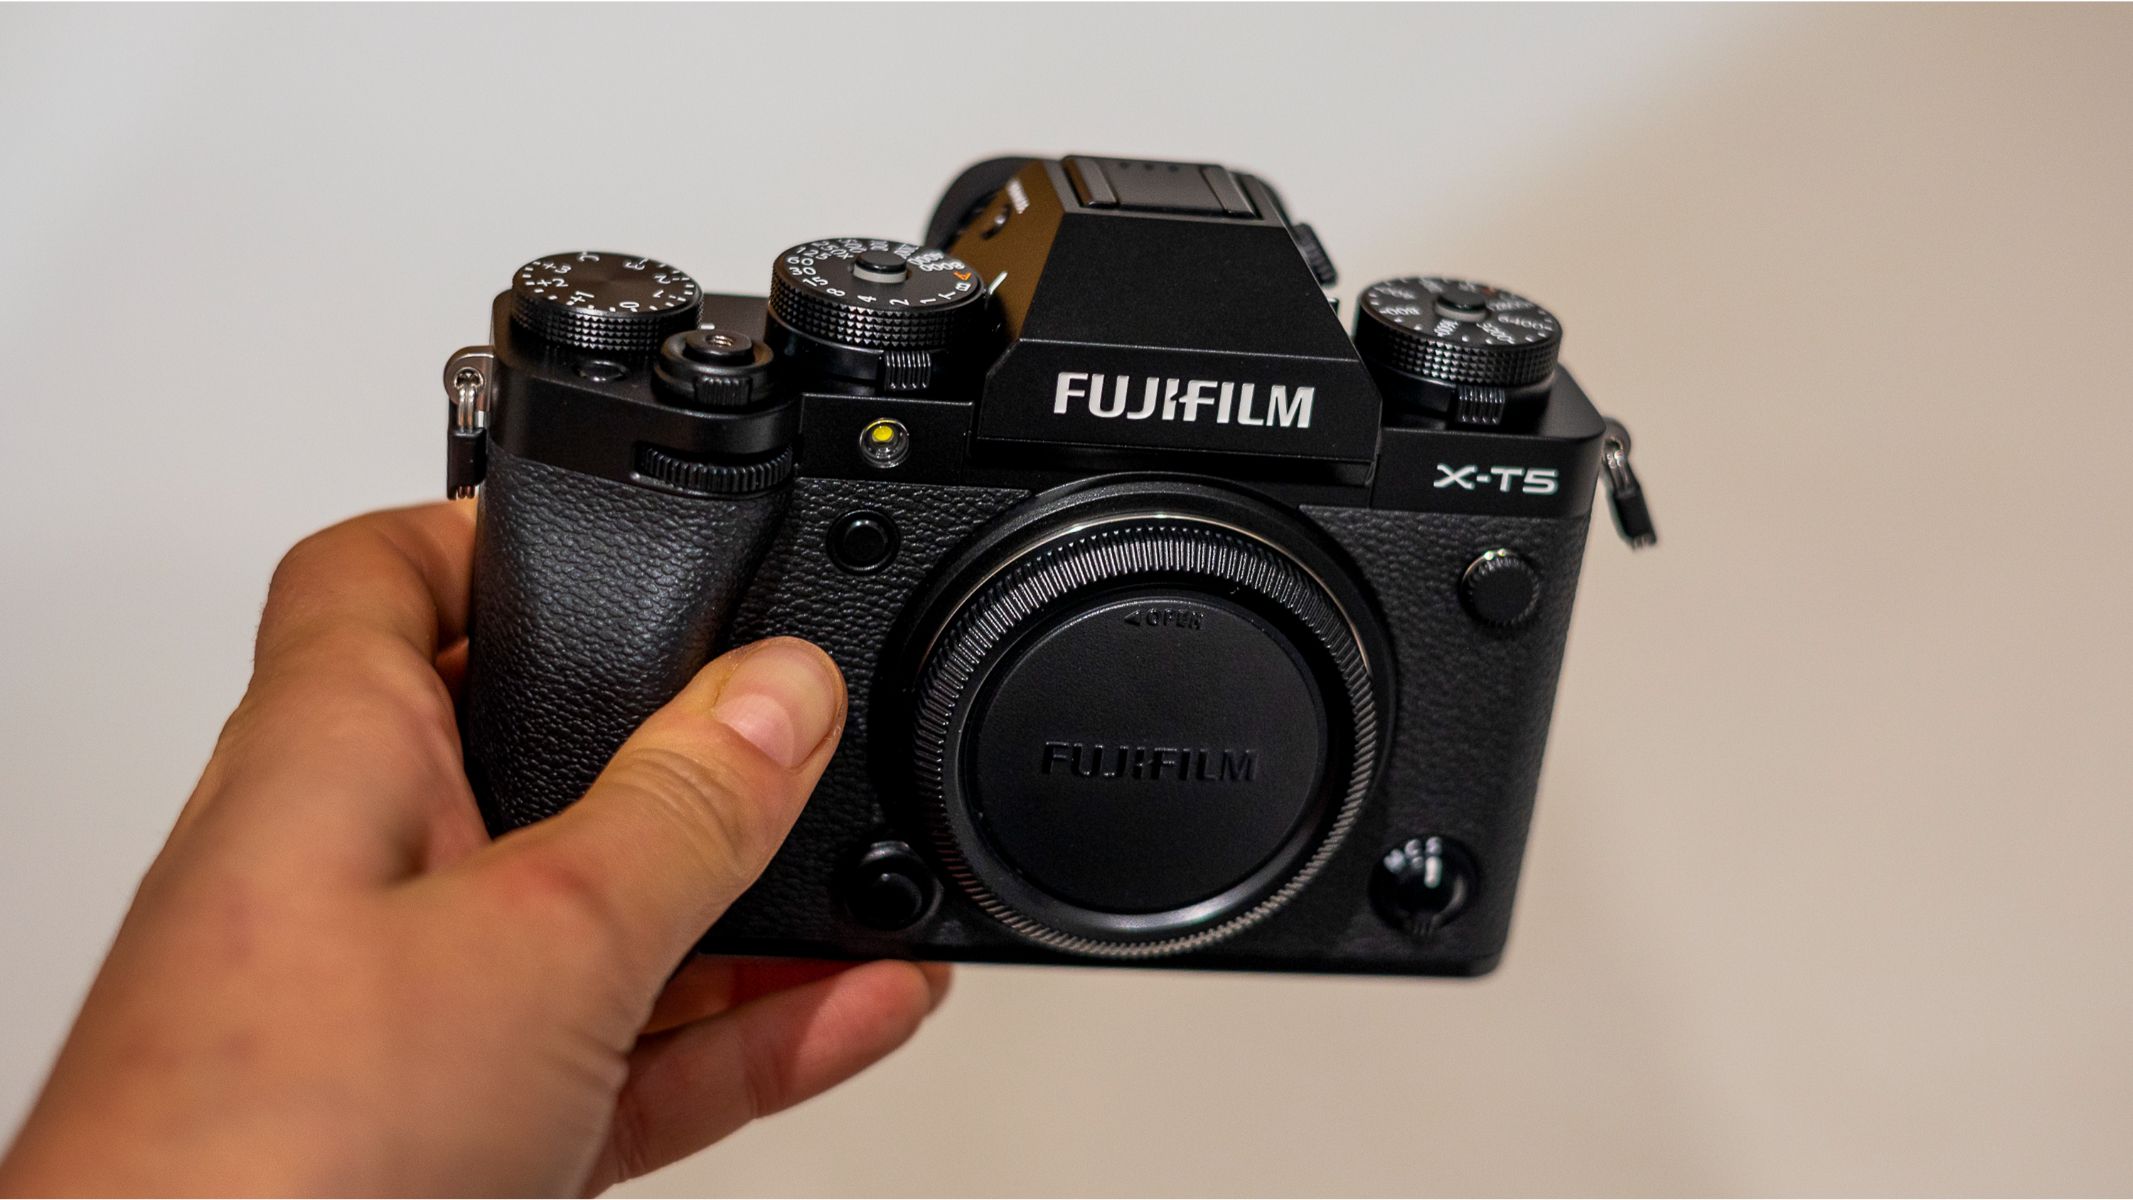 Fujifilm X-T5 in-hand against a white background